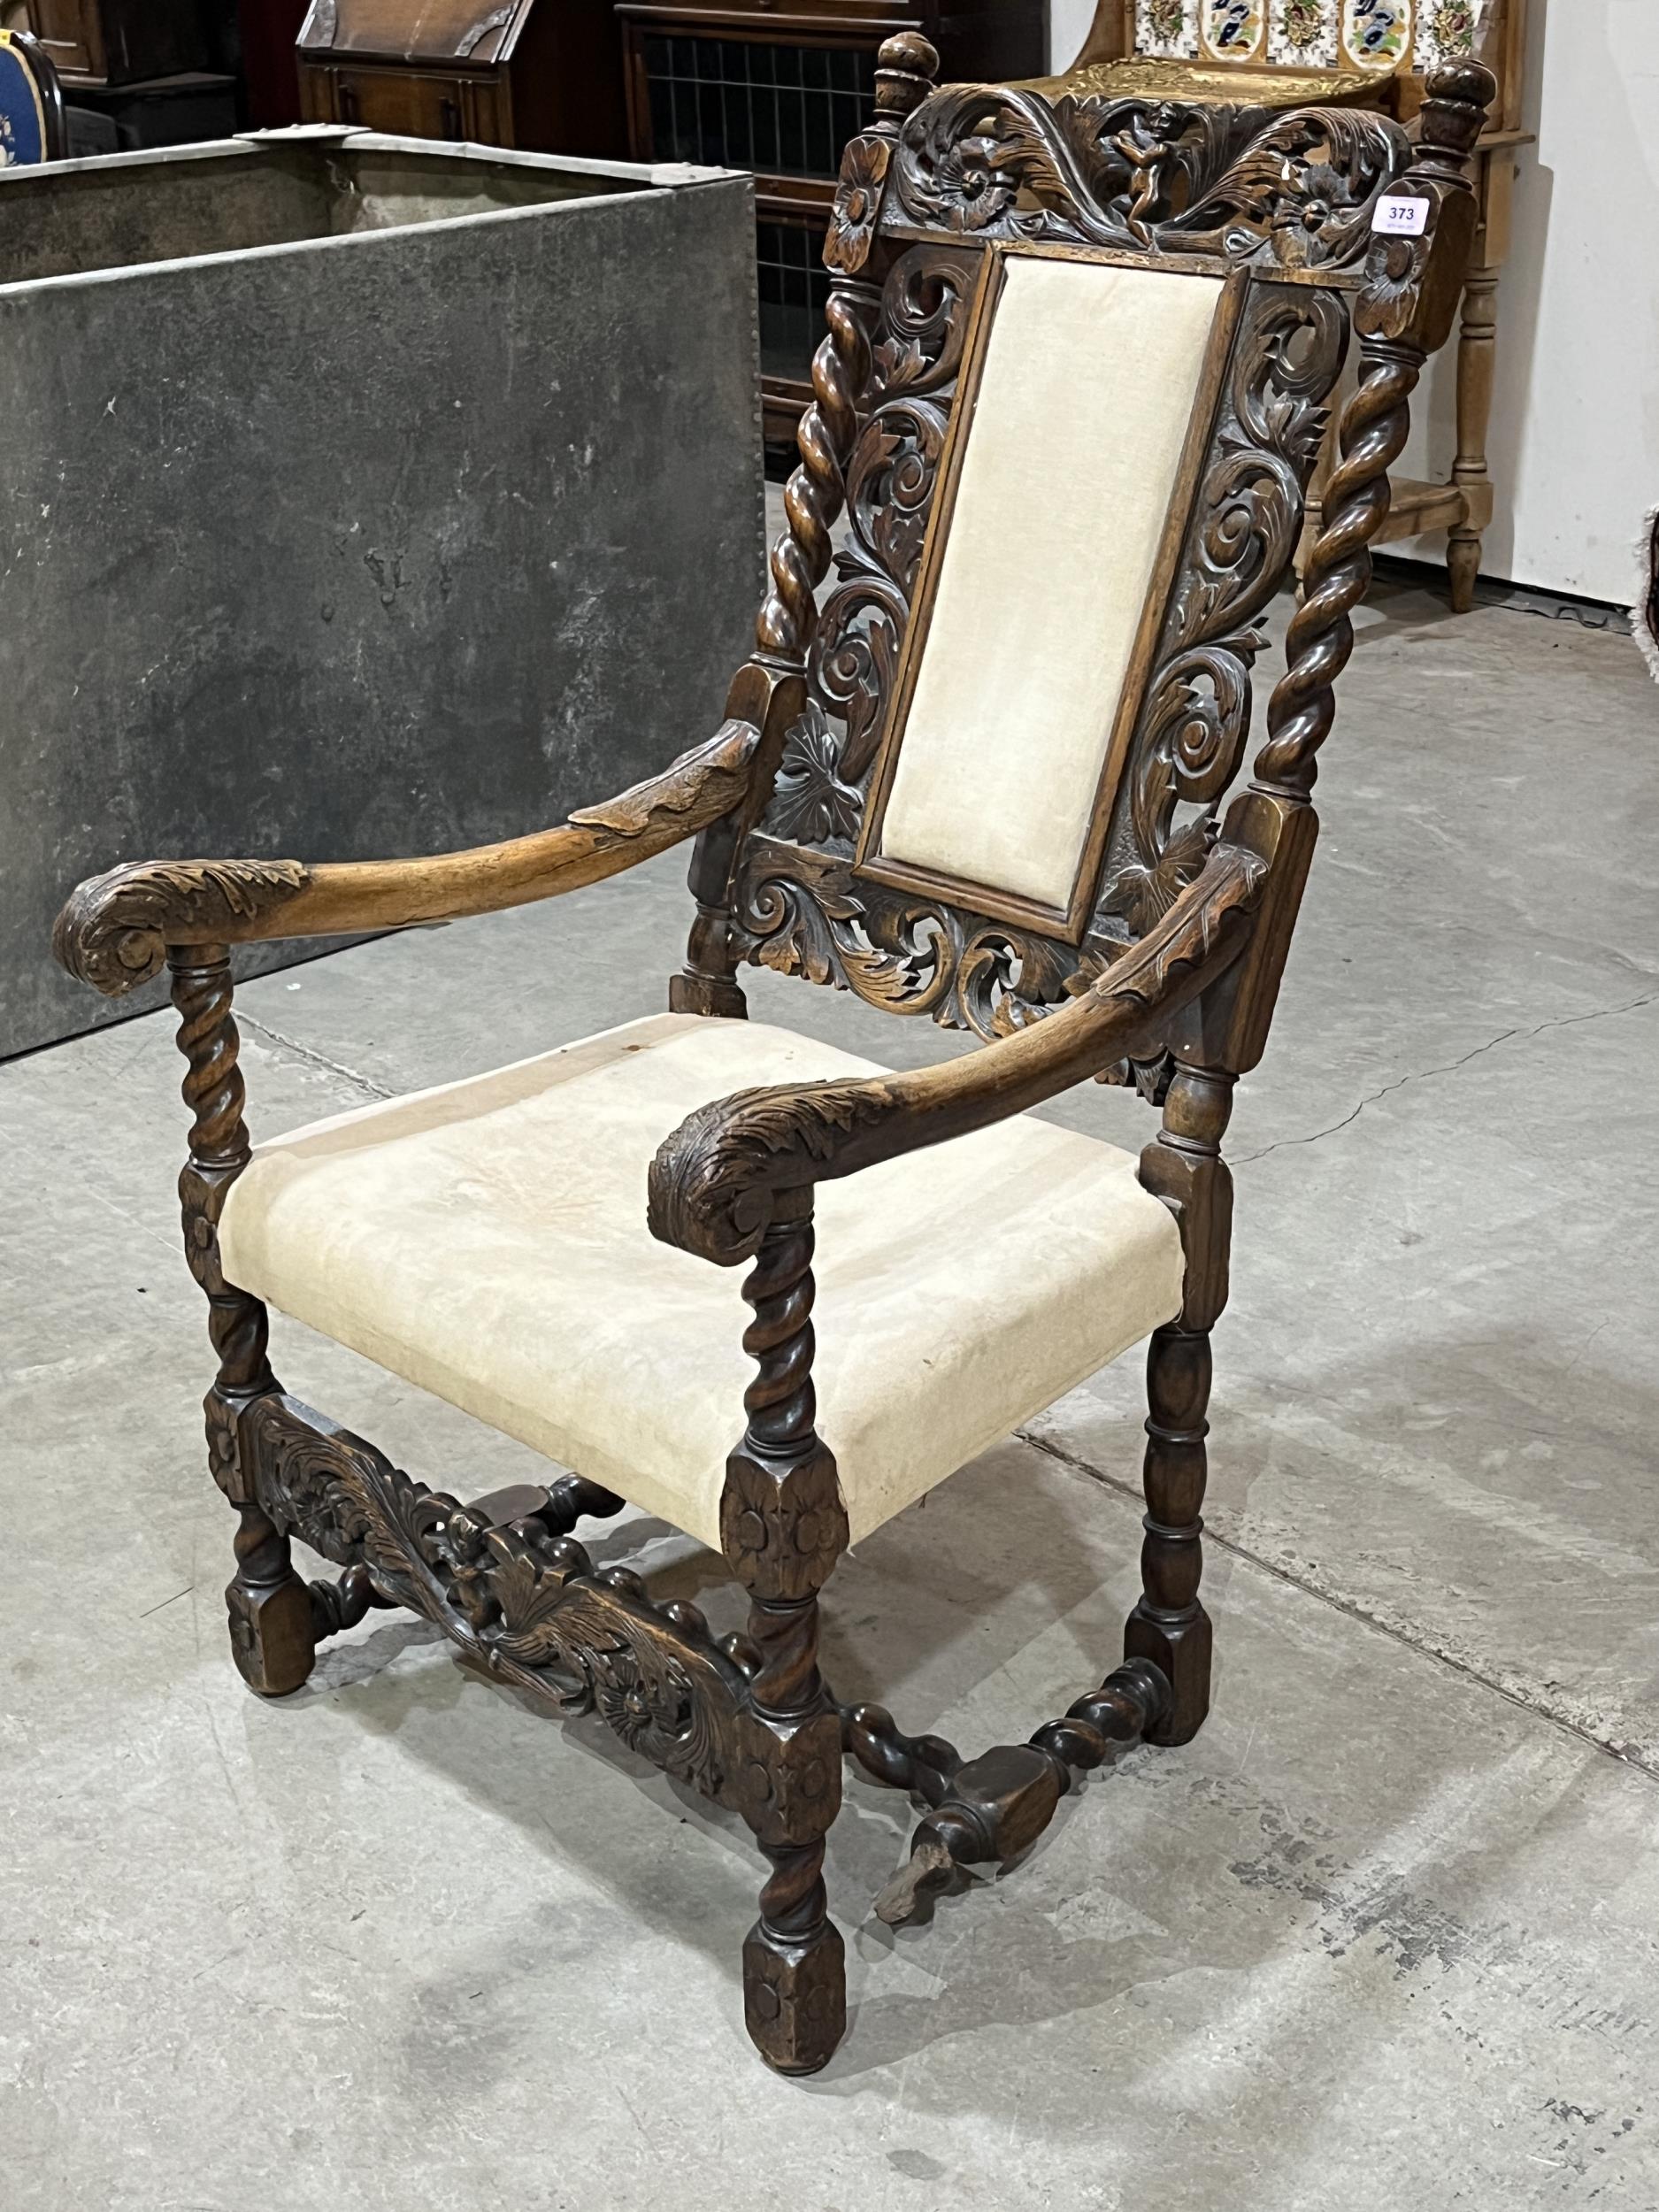 A 17th Century Flemish carved walnut armchair with barleytwist column uprights and stretchers. - Image 2 of 2